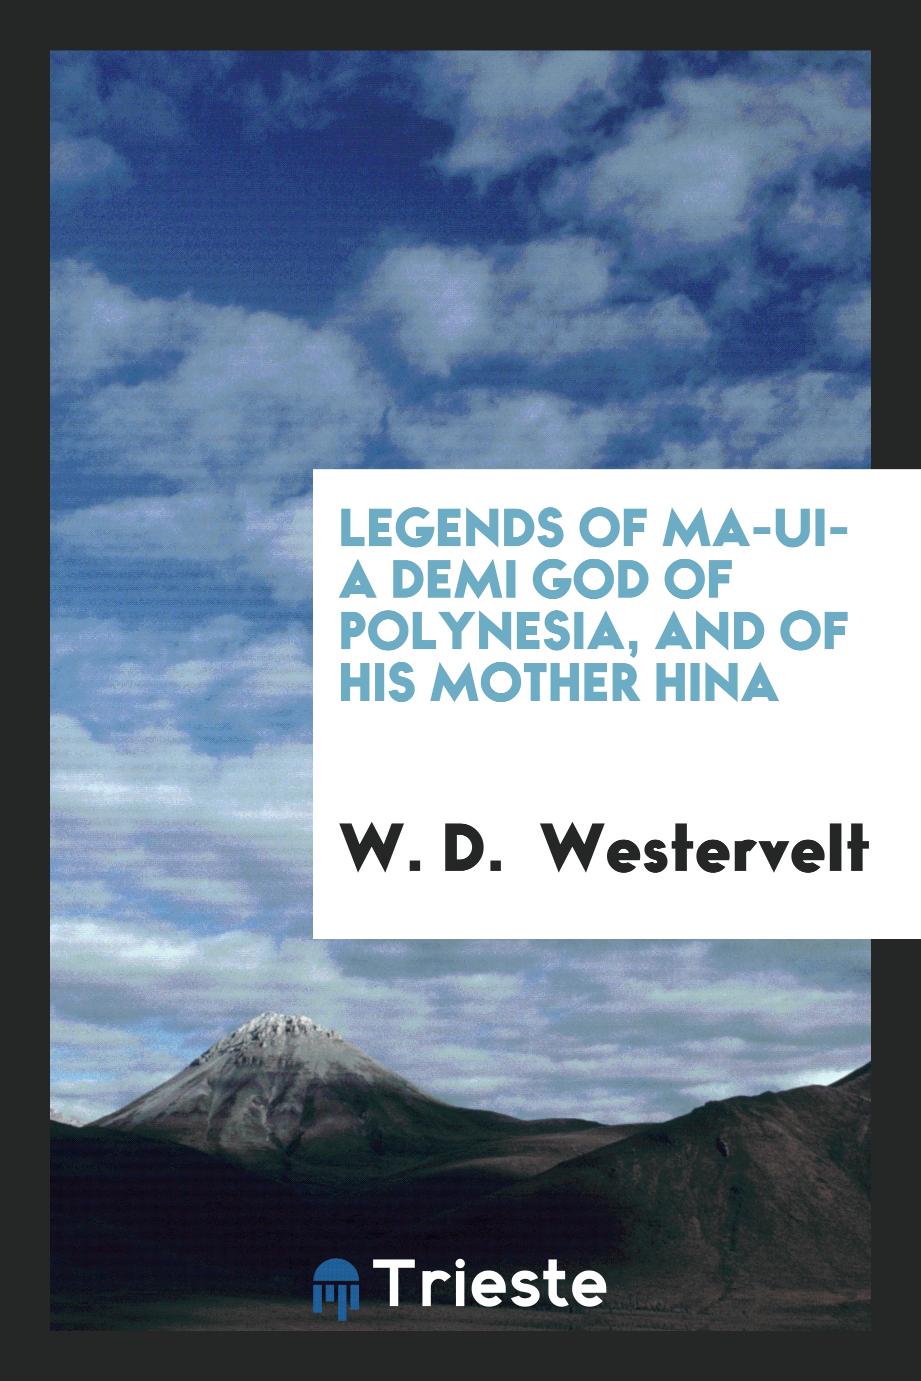 Legends of Ma-Ui- a Demi God of Polynesia, and of His Mother Hina